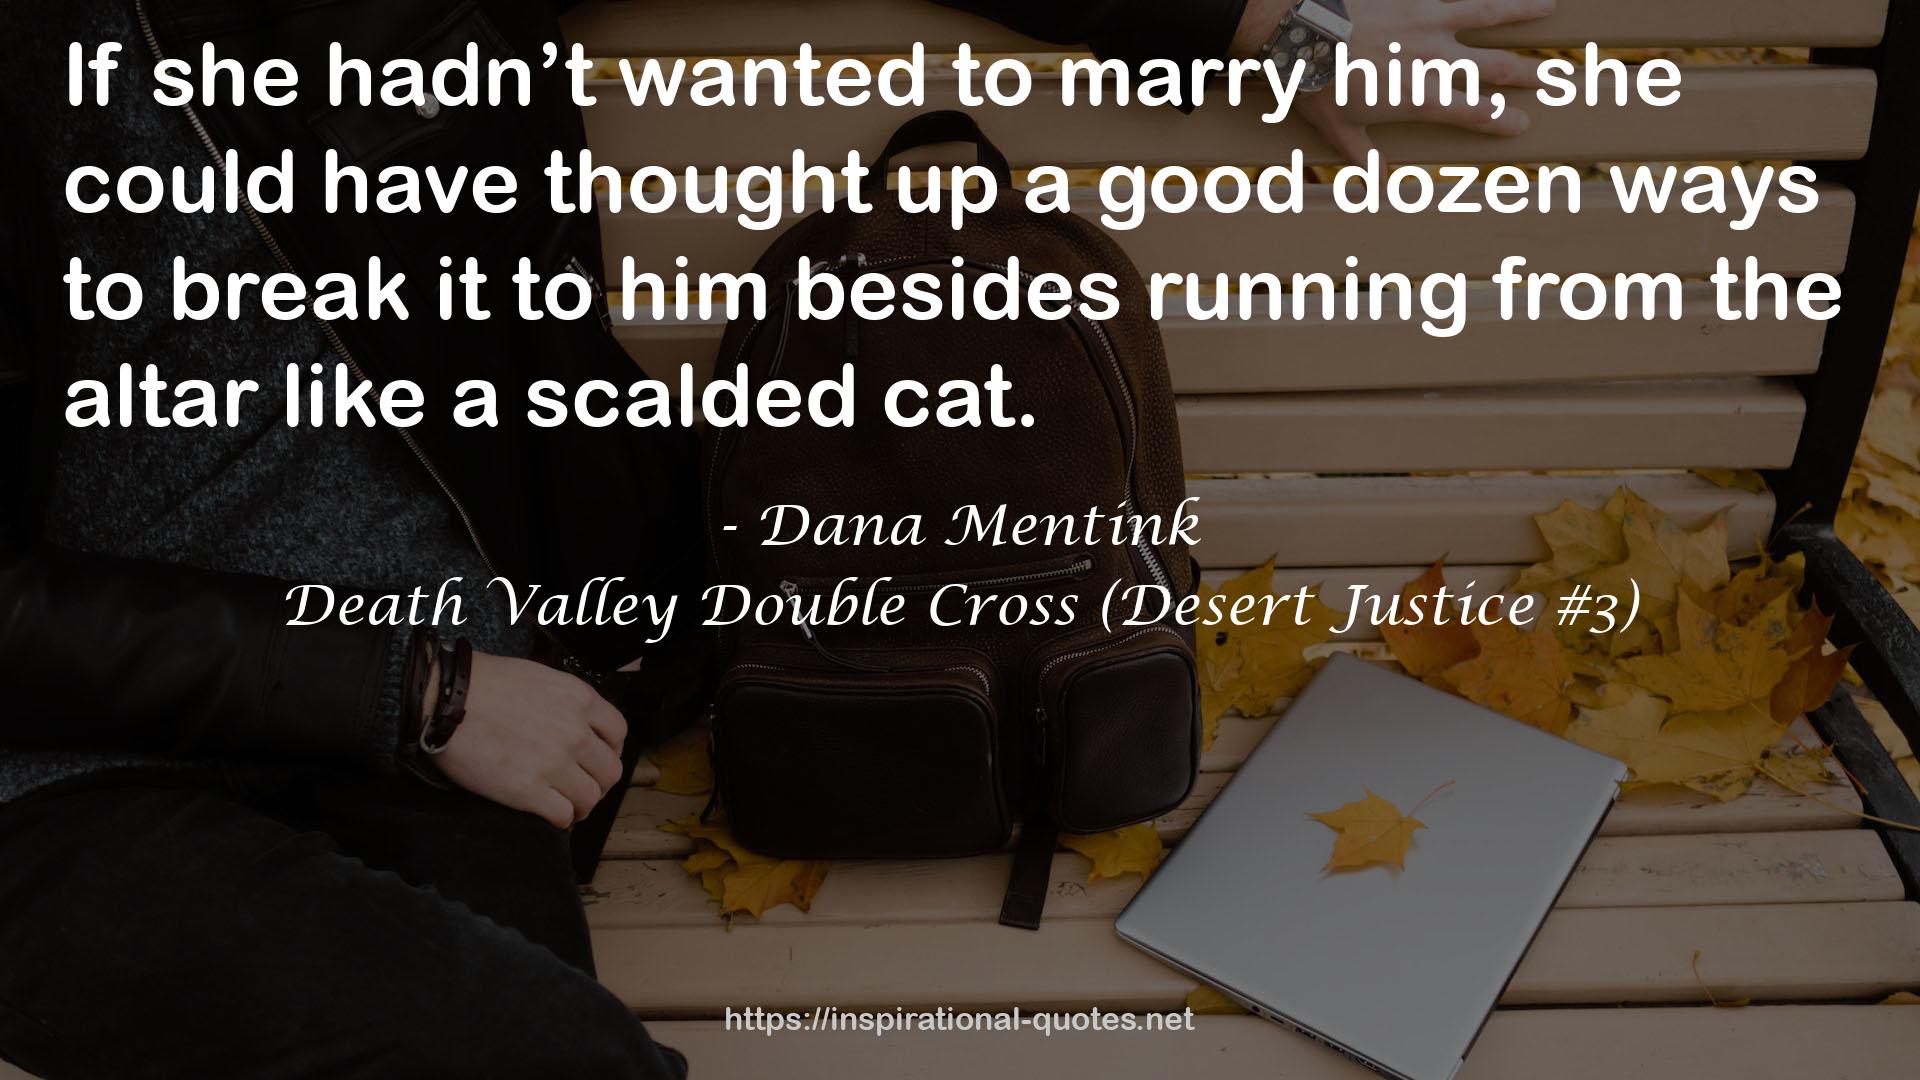 Death Valley Double Cross (Desert Justice #3) QUOTES